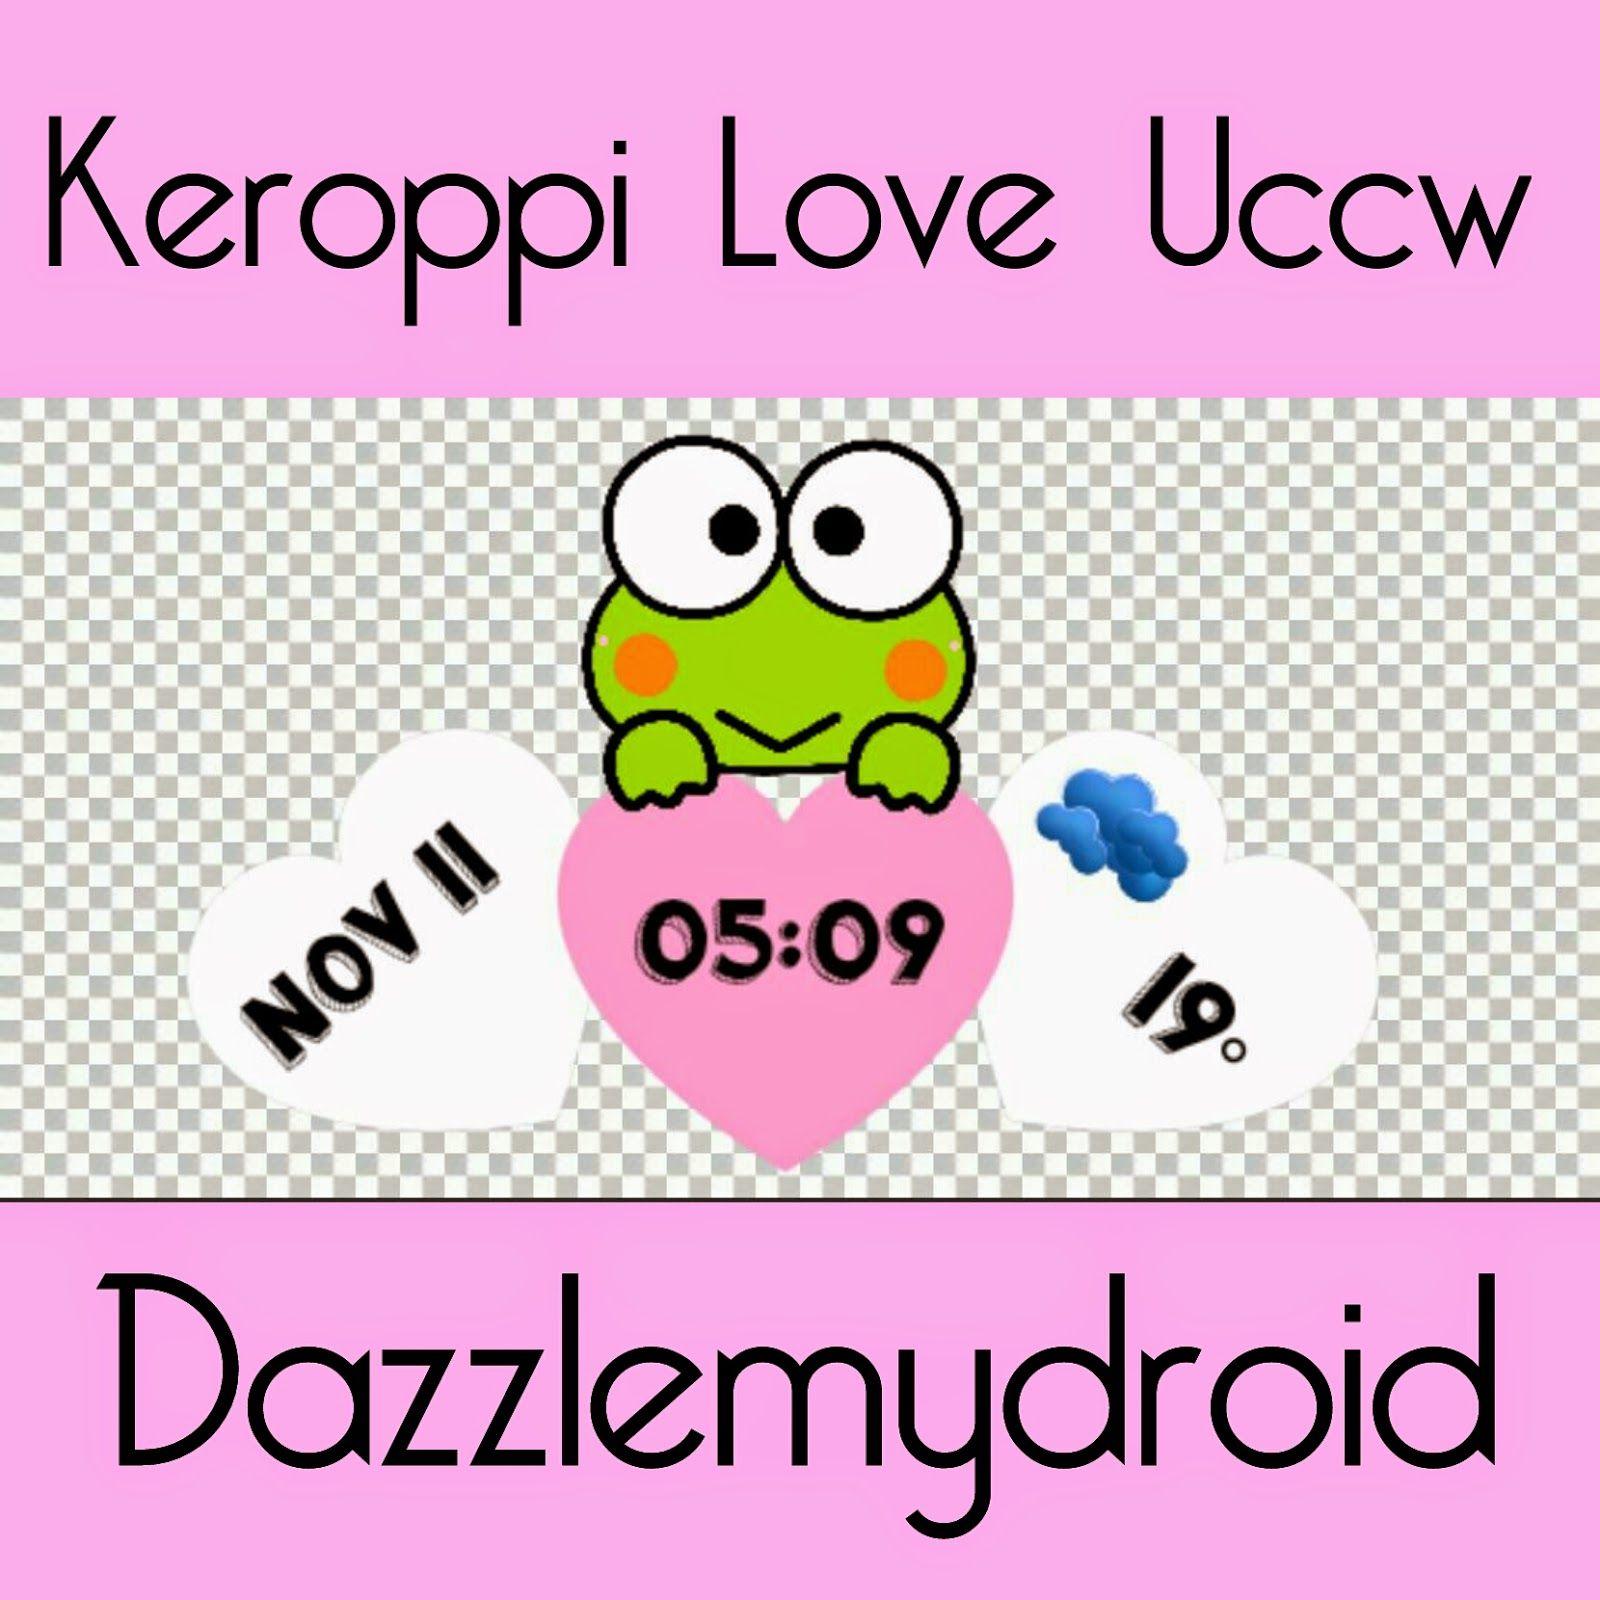 Dazzle my Droid: keroppi heart uccw